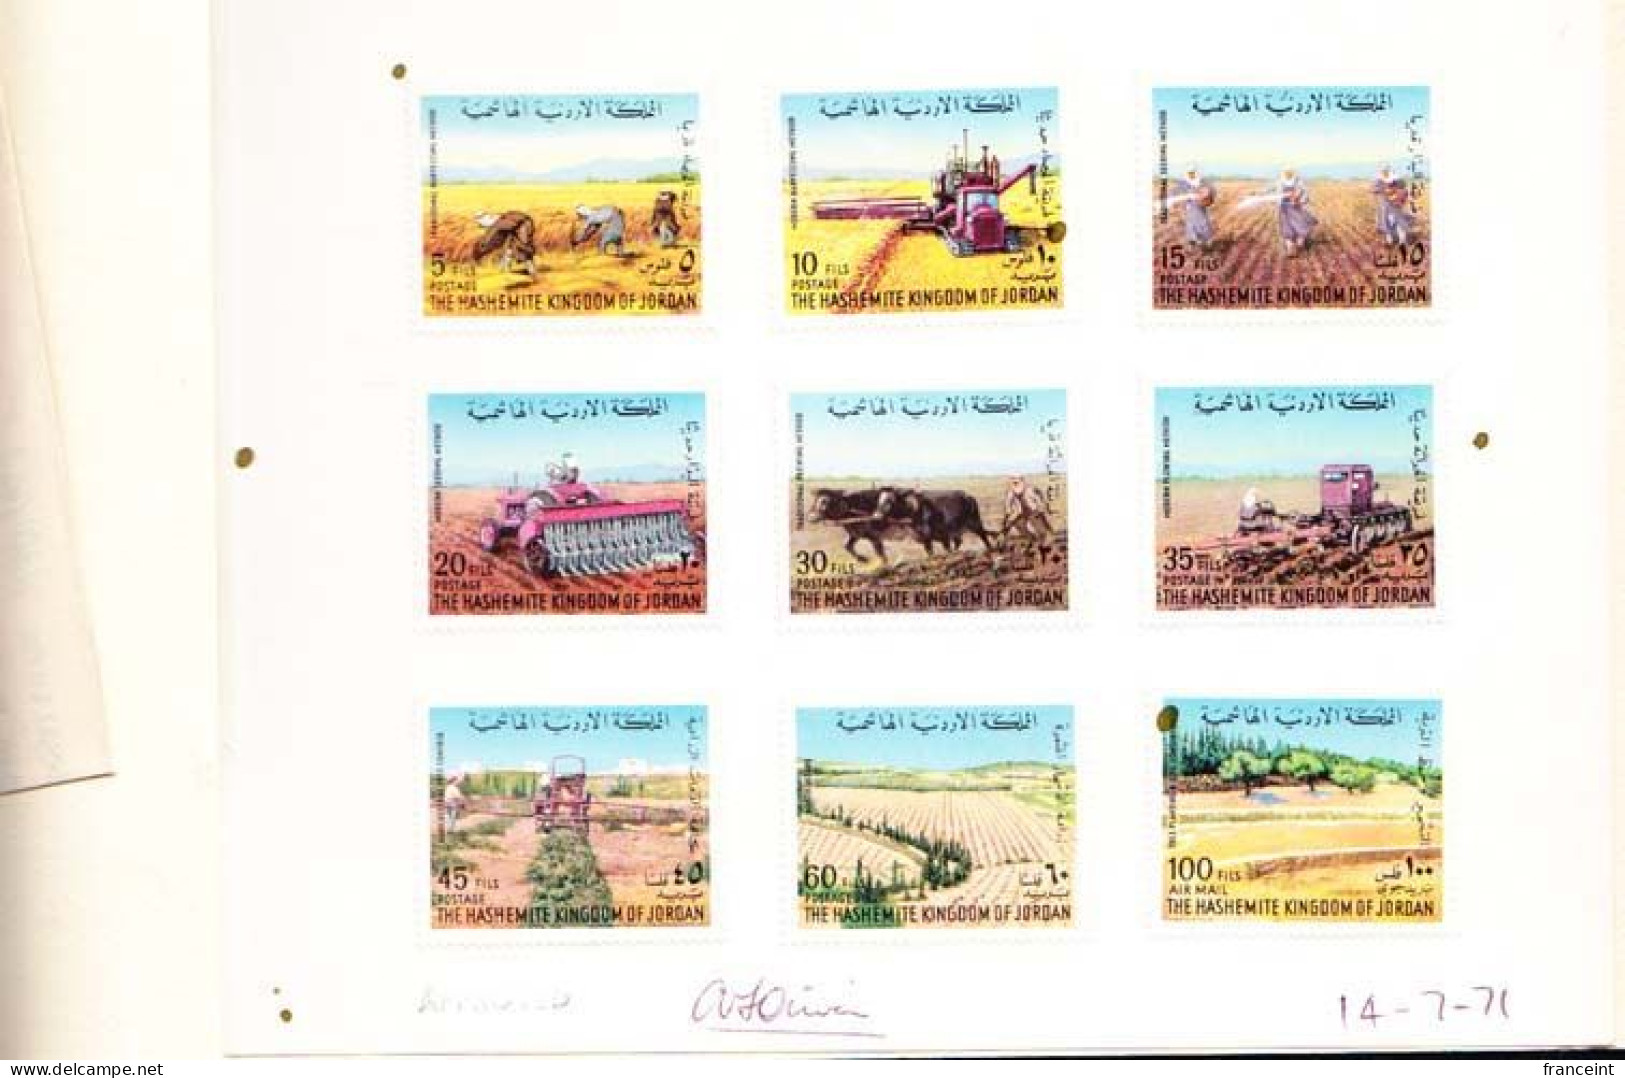 JORDAN(1973) Traditional And Modern Agriculture. Set Of 9 Proofs Mounted In Booklet With "APPROVED" Stamp And Signature - Jordanie